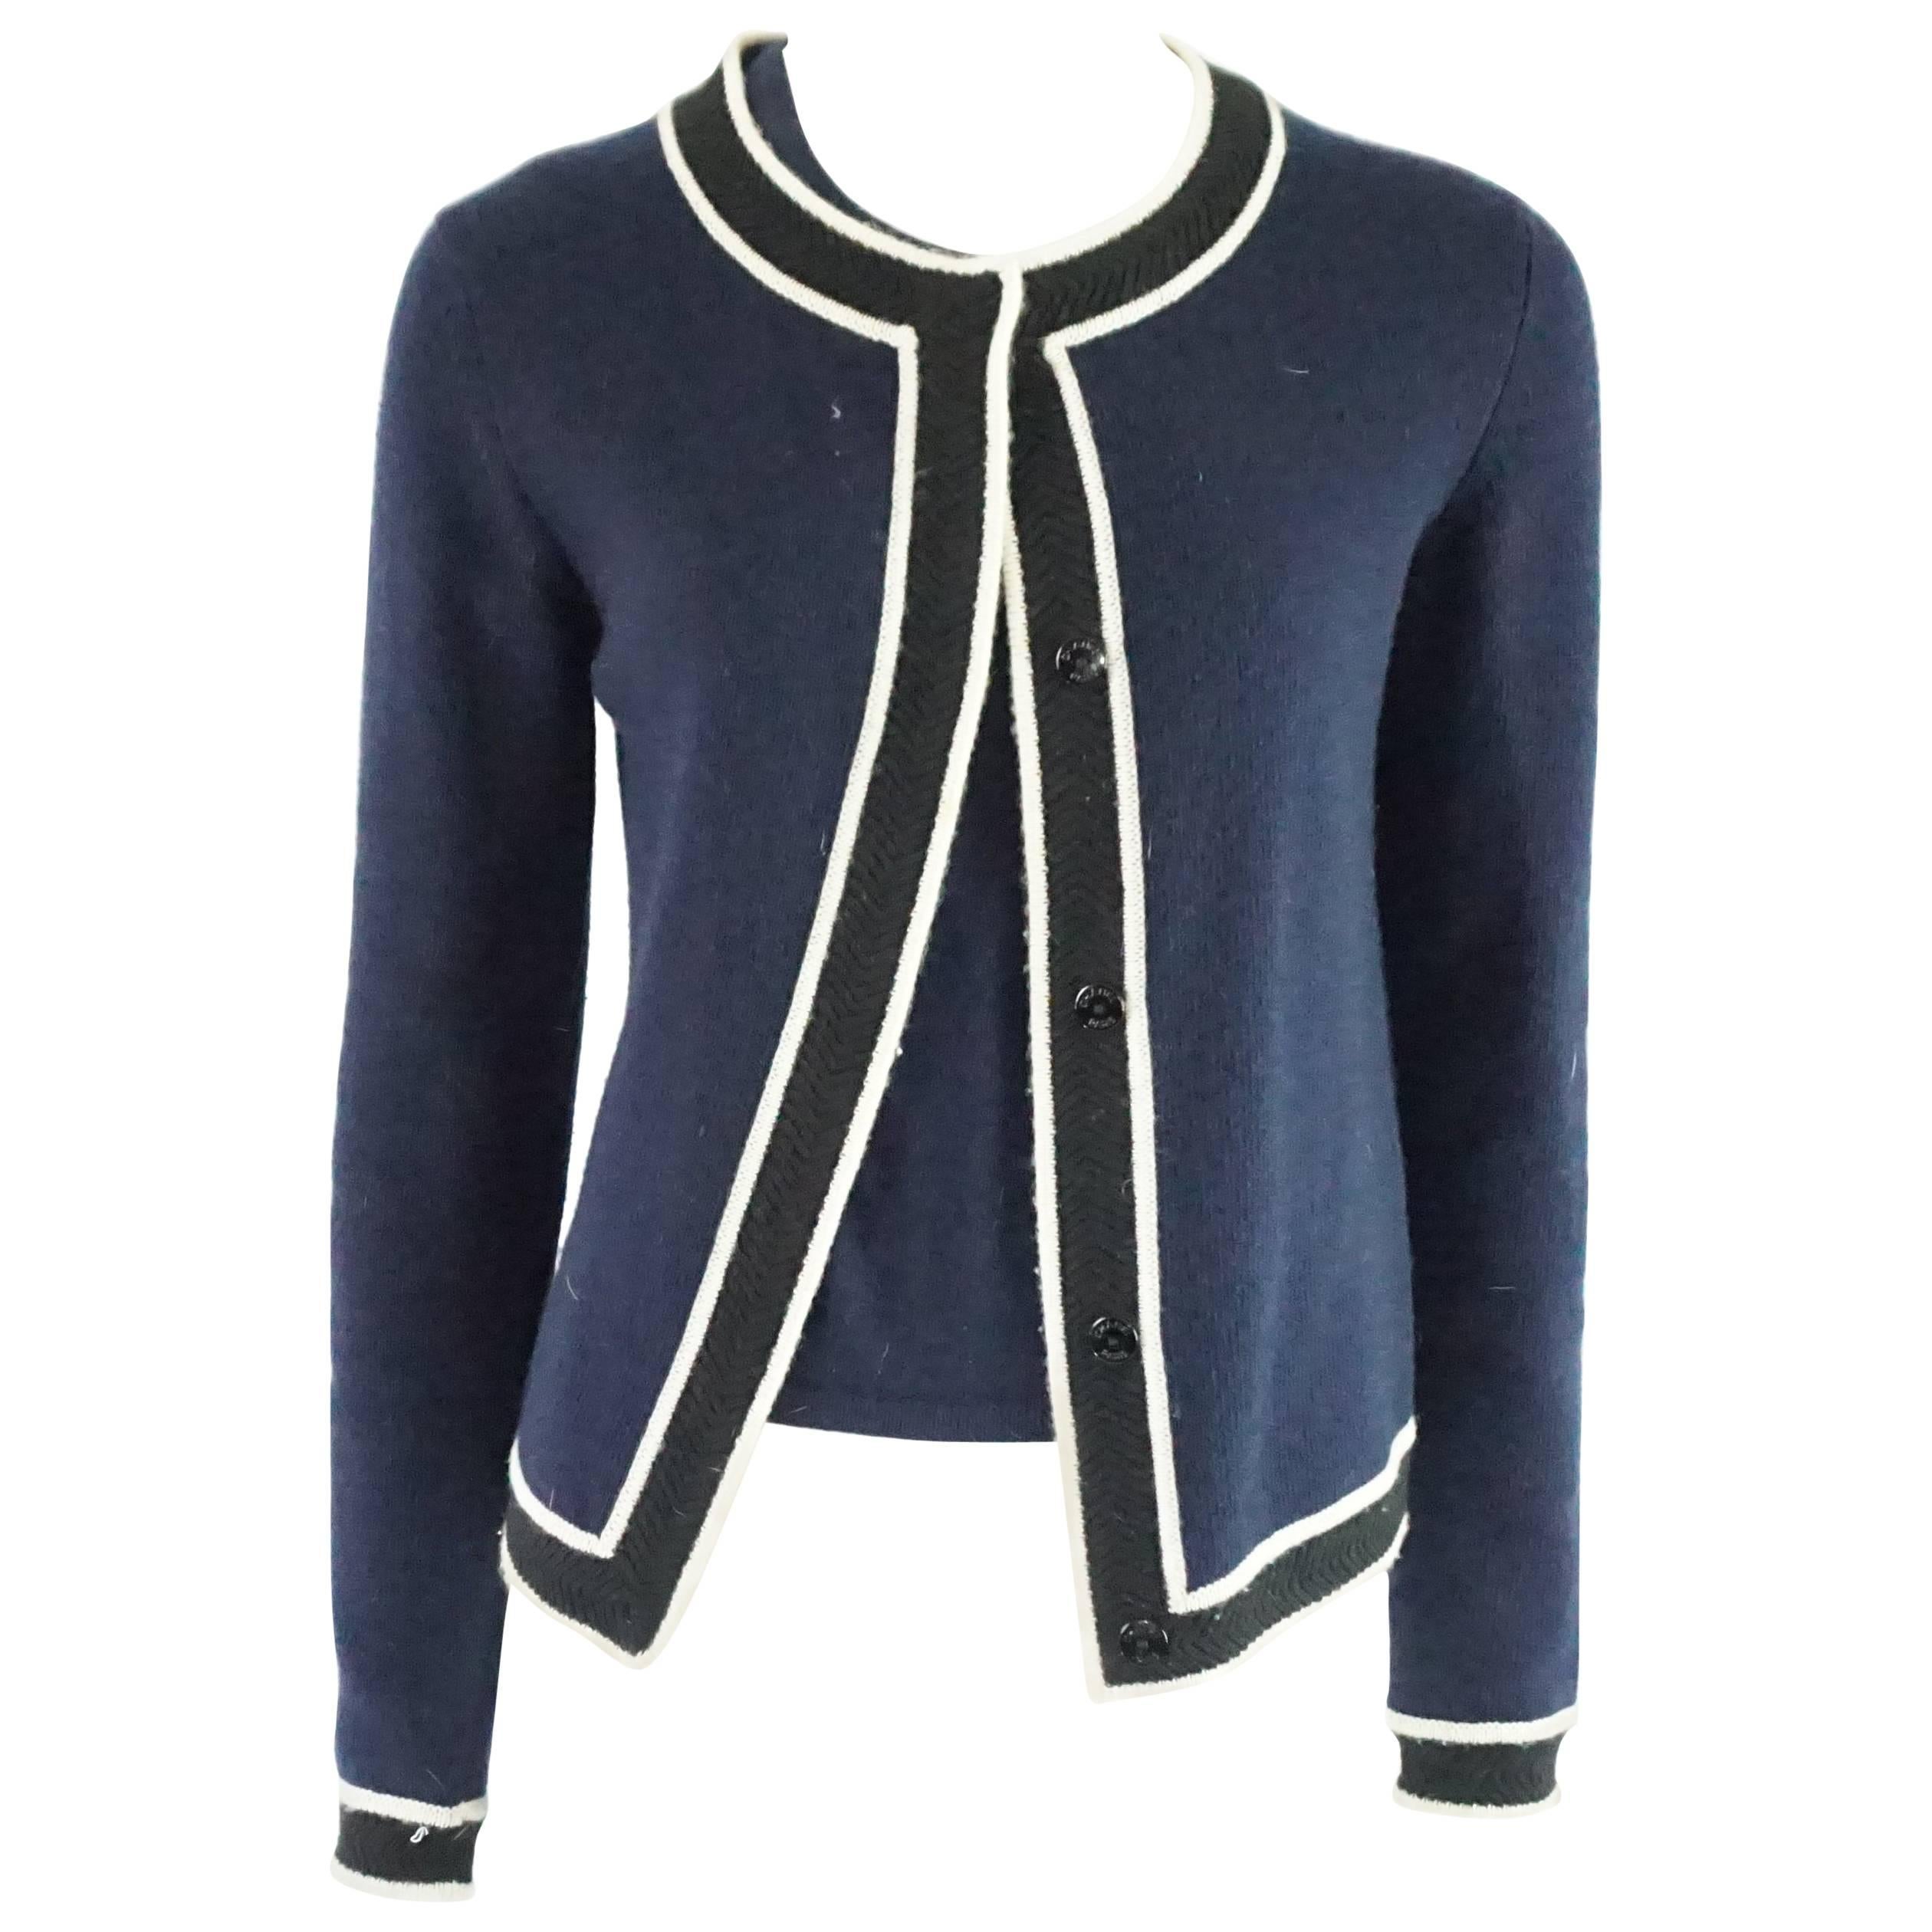 Chanel Navy Cashmere Sweater Set with Black and White Trim - 38